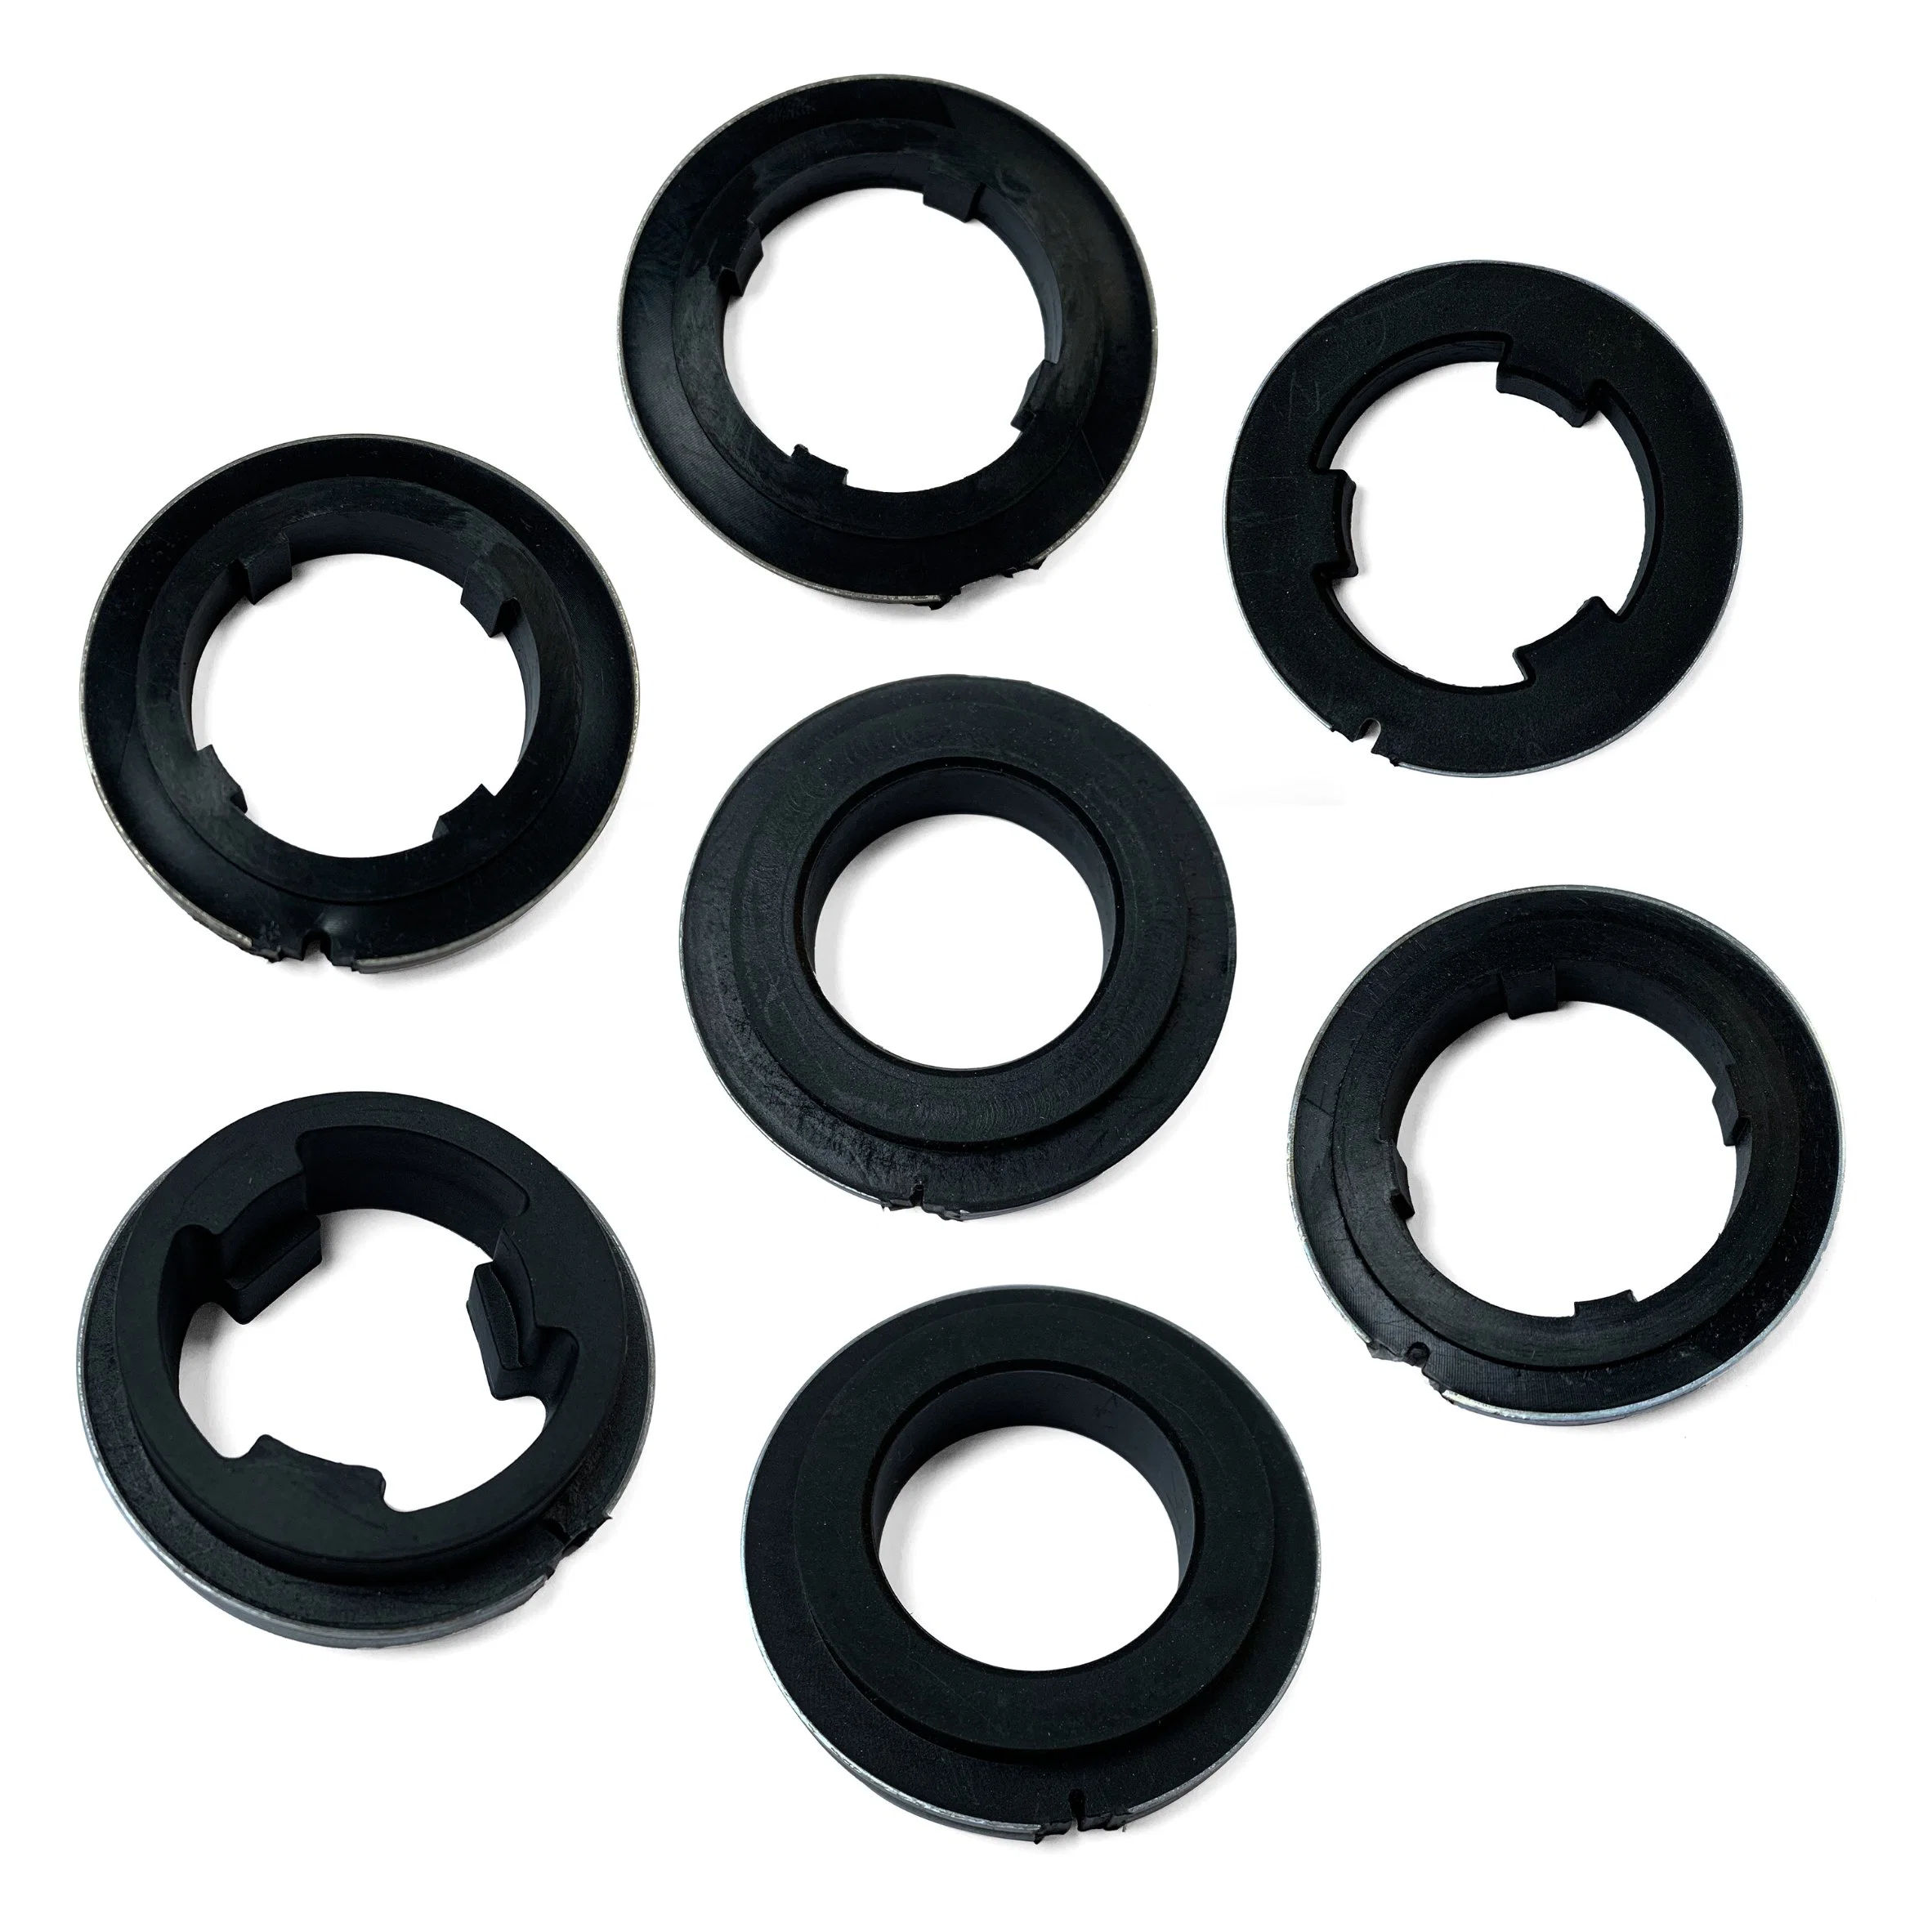 Custom Rubber Parts for Appliance Motors